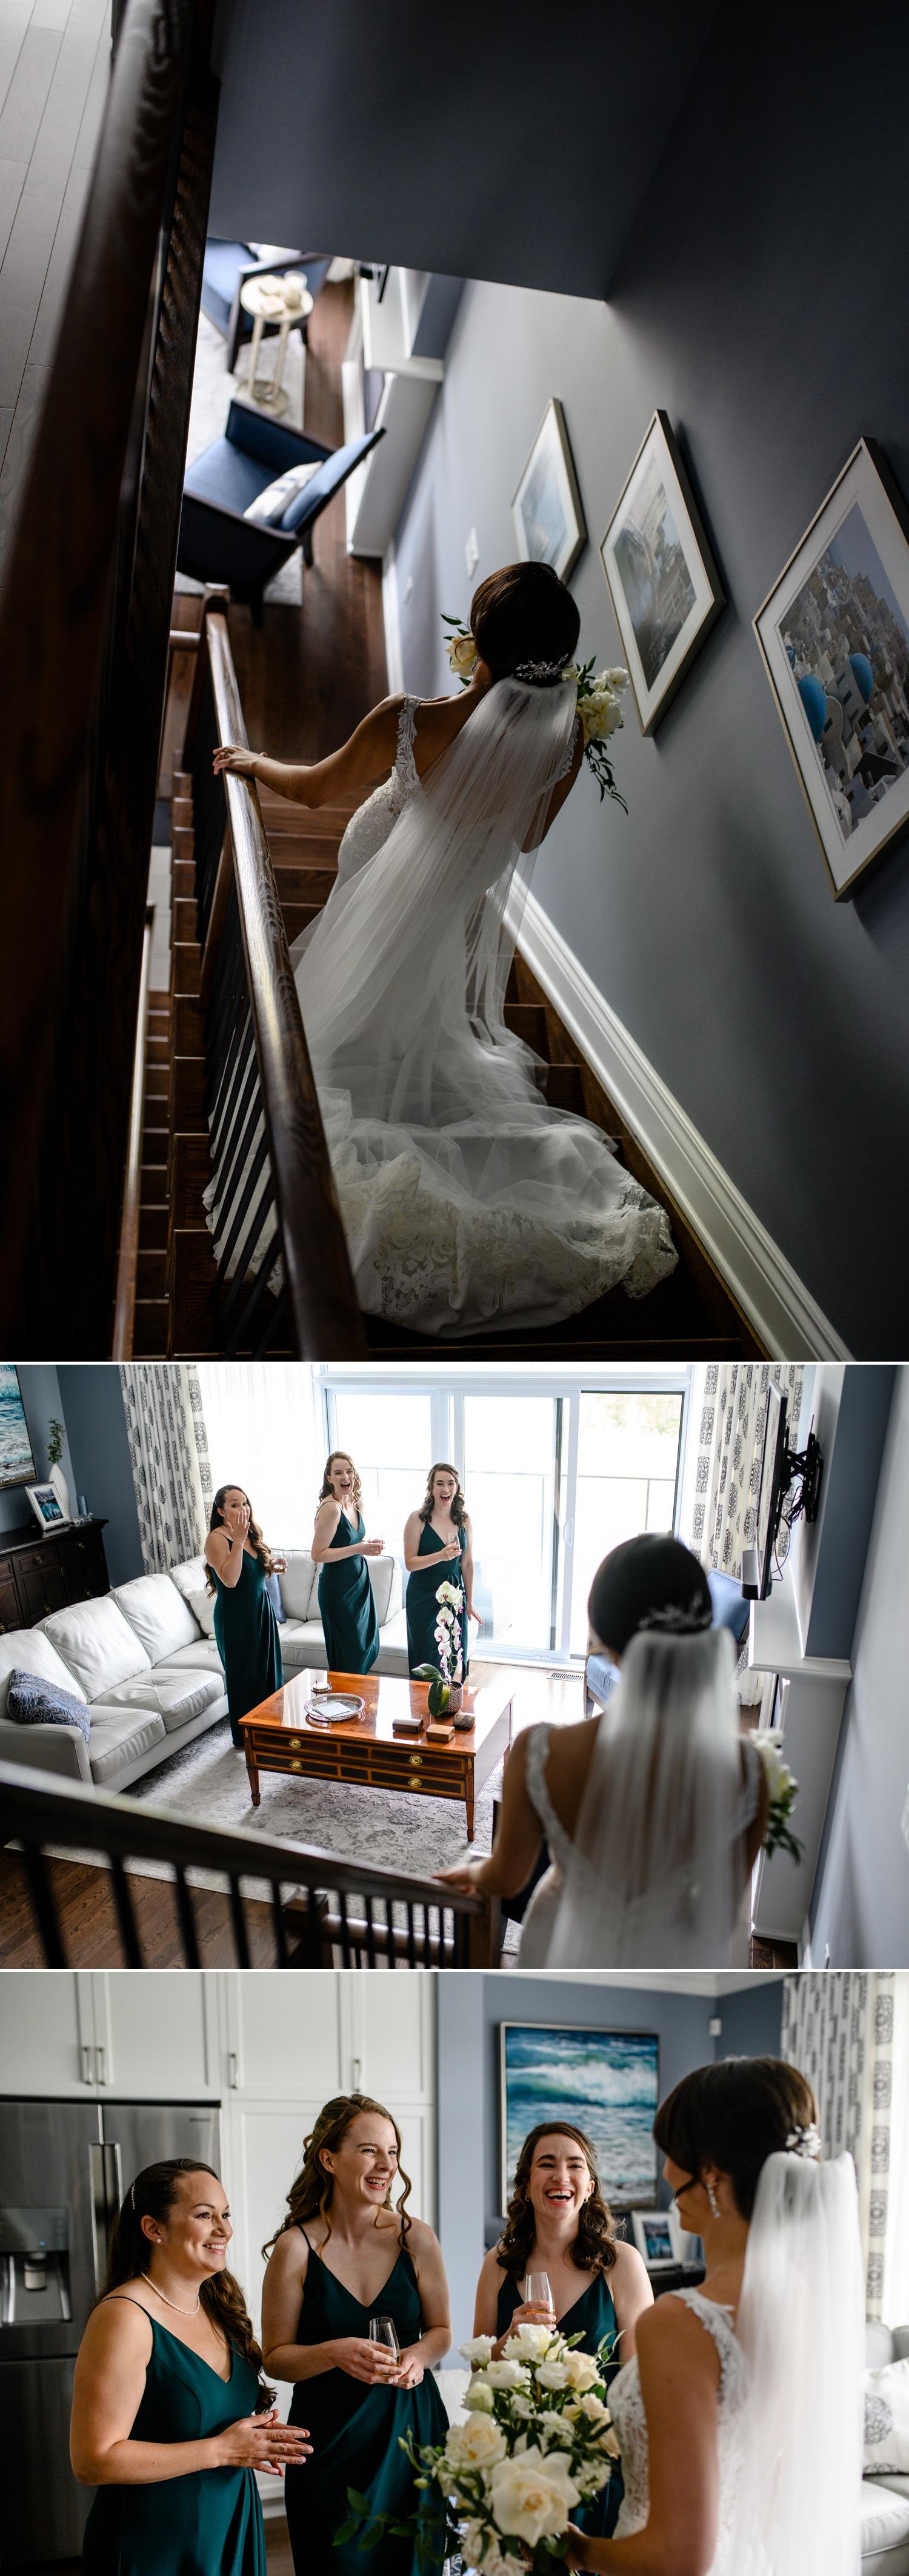 photos of bridesmaids seeing the bride in her wedding dress for the first time